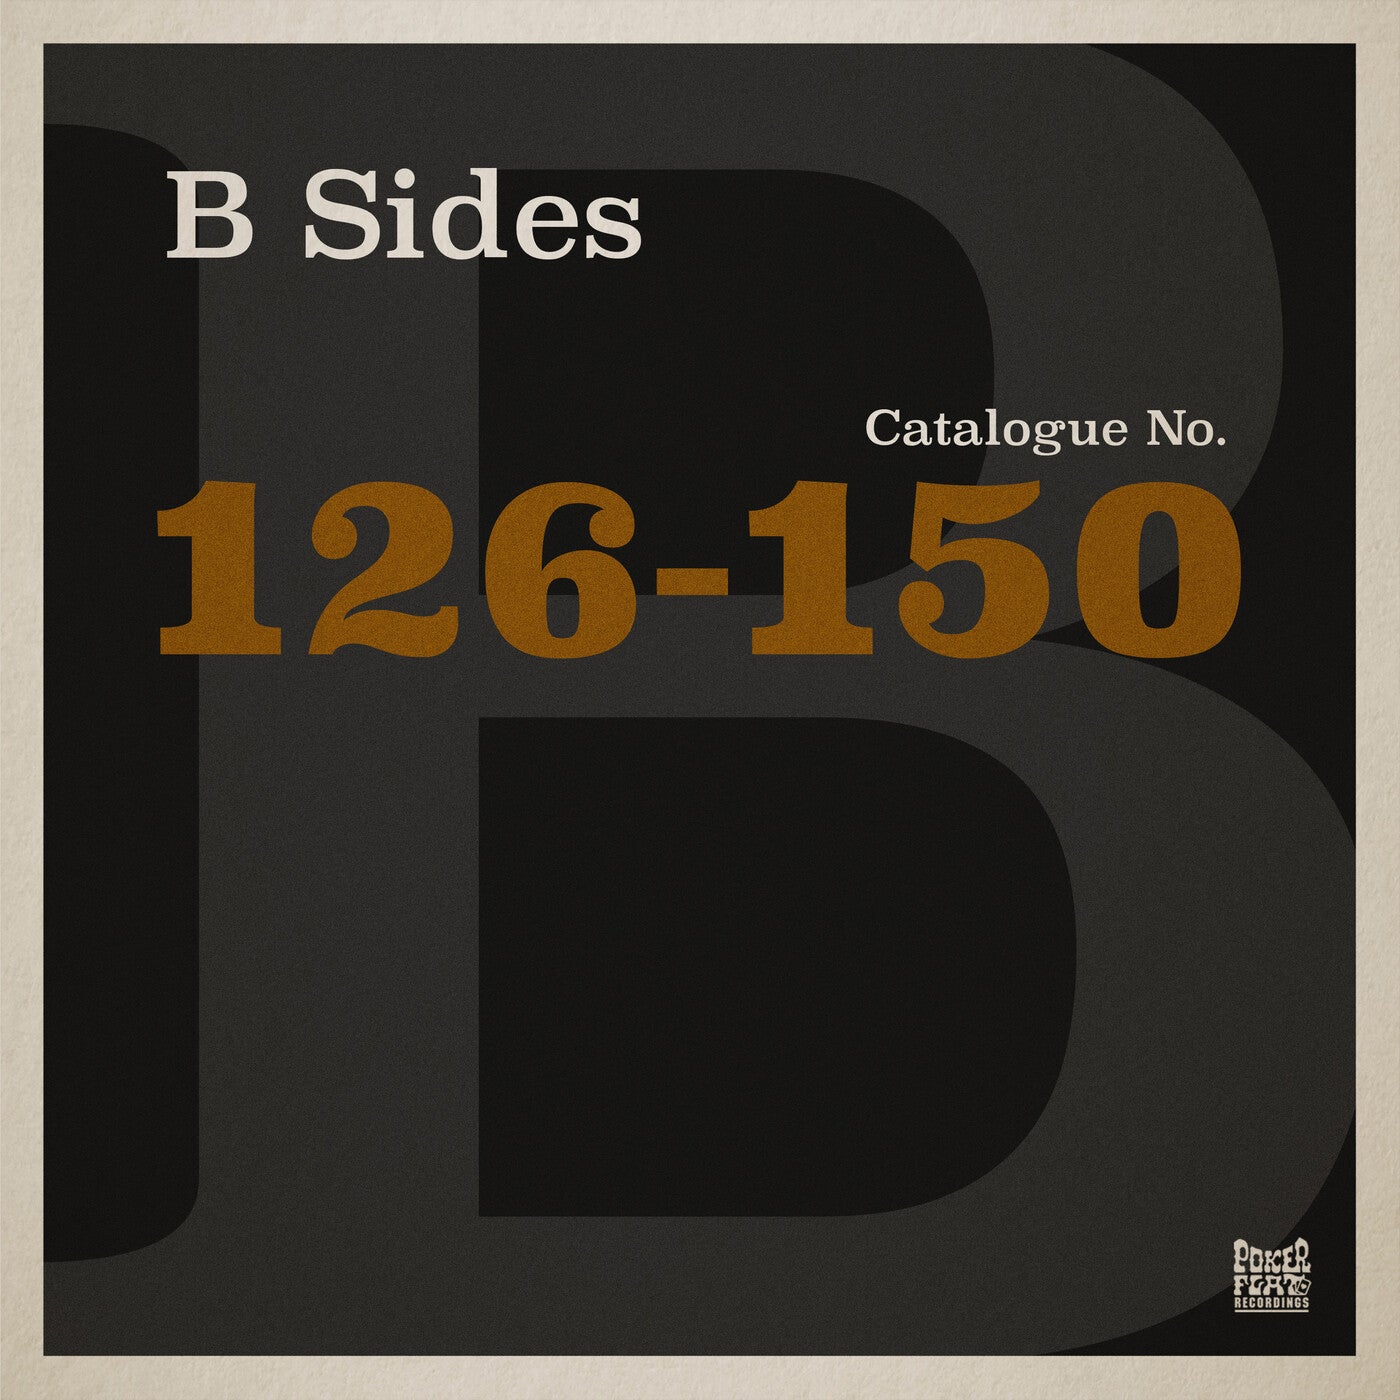 Download The Poker Flat B Sides - Chapter Six (The Best of Catalogue 126-150) on Electrobuzz